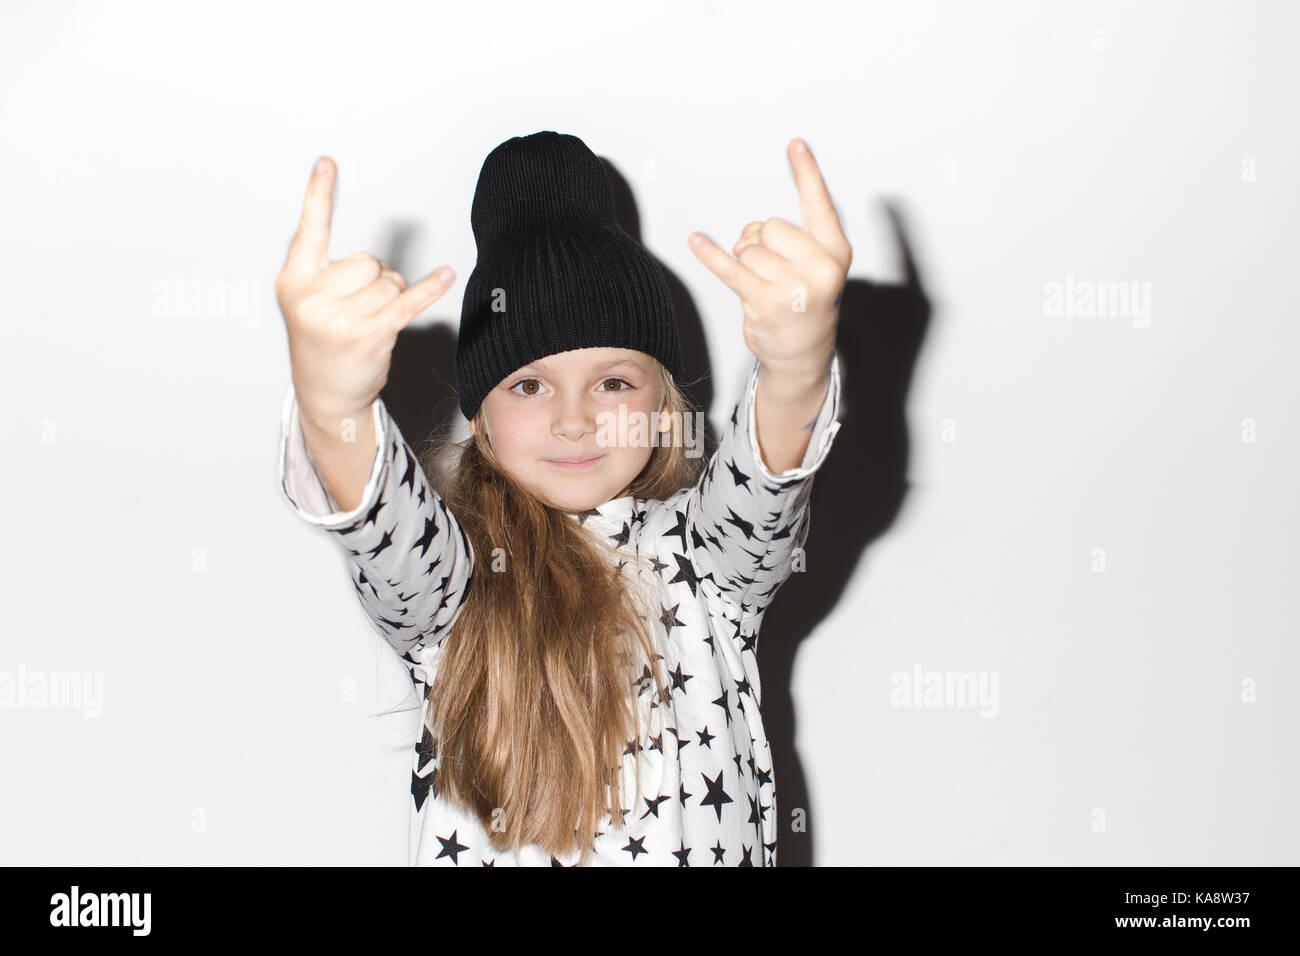 Cute girl gesturing rock at camera on a white background Stock Photo